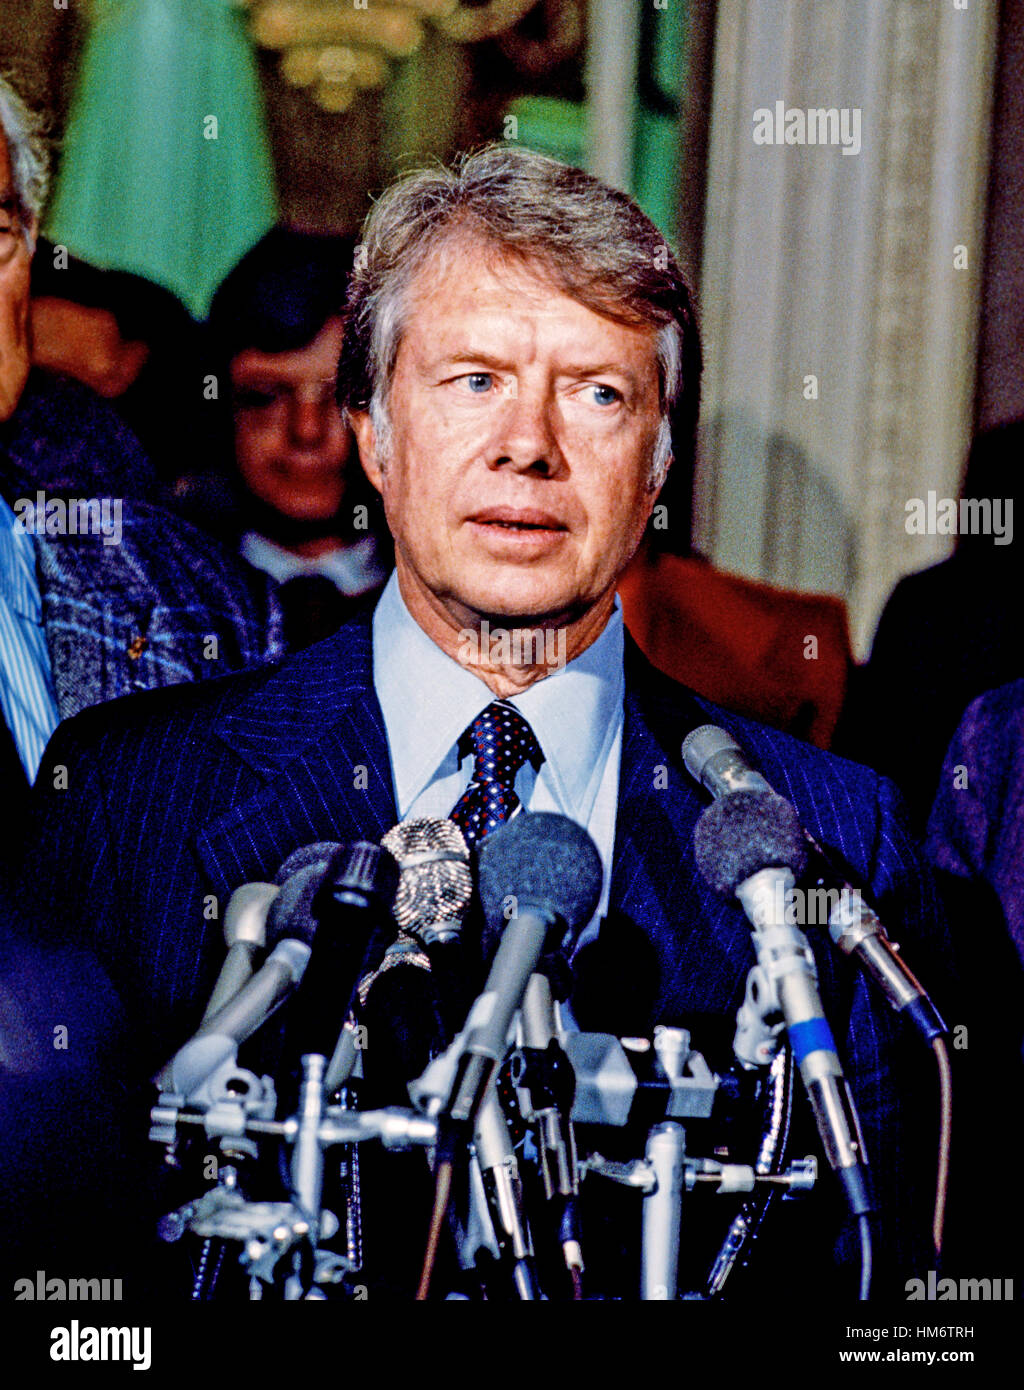 United States President-elect Jimmy Carter meets reporters after meeting with Congressional leaders in the US Capitol in Washington, DC on November 23, 1976. Stock Photo